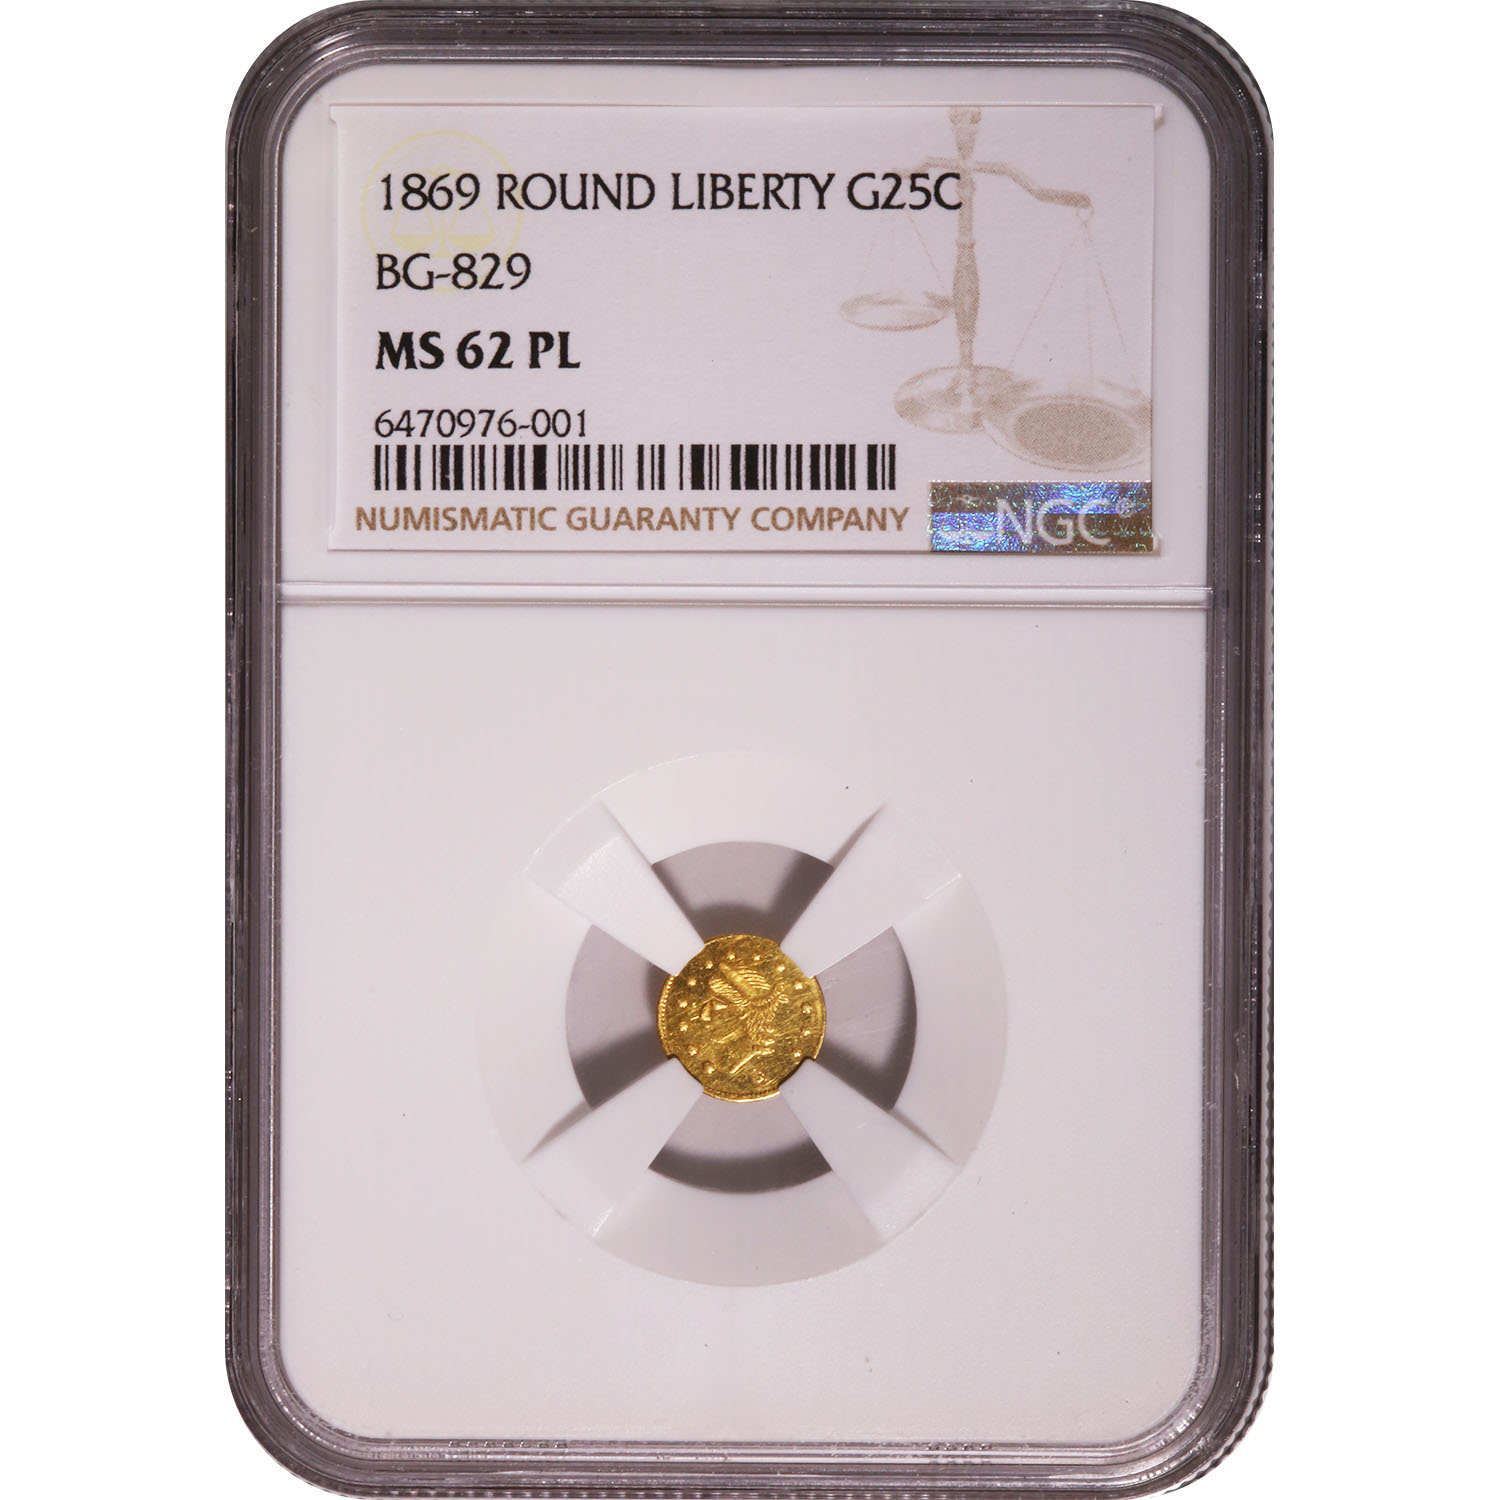 Certified Round Liberty 1869 25 Cents MS62PL NGC BG-829